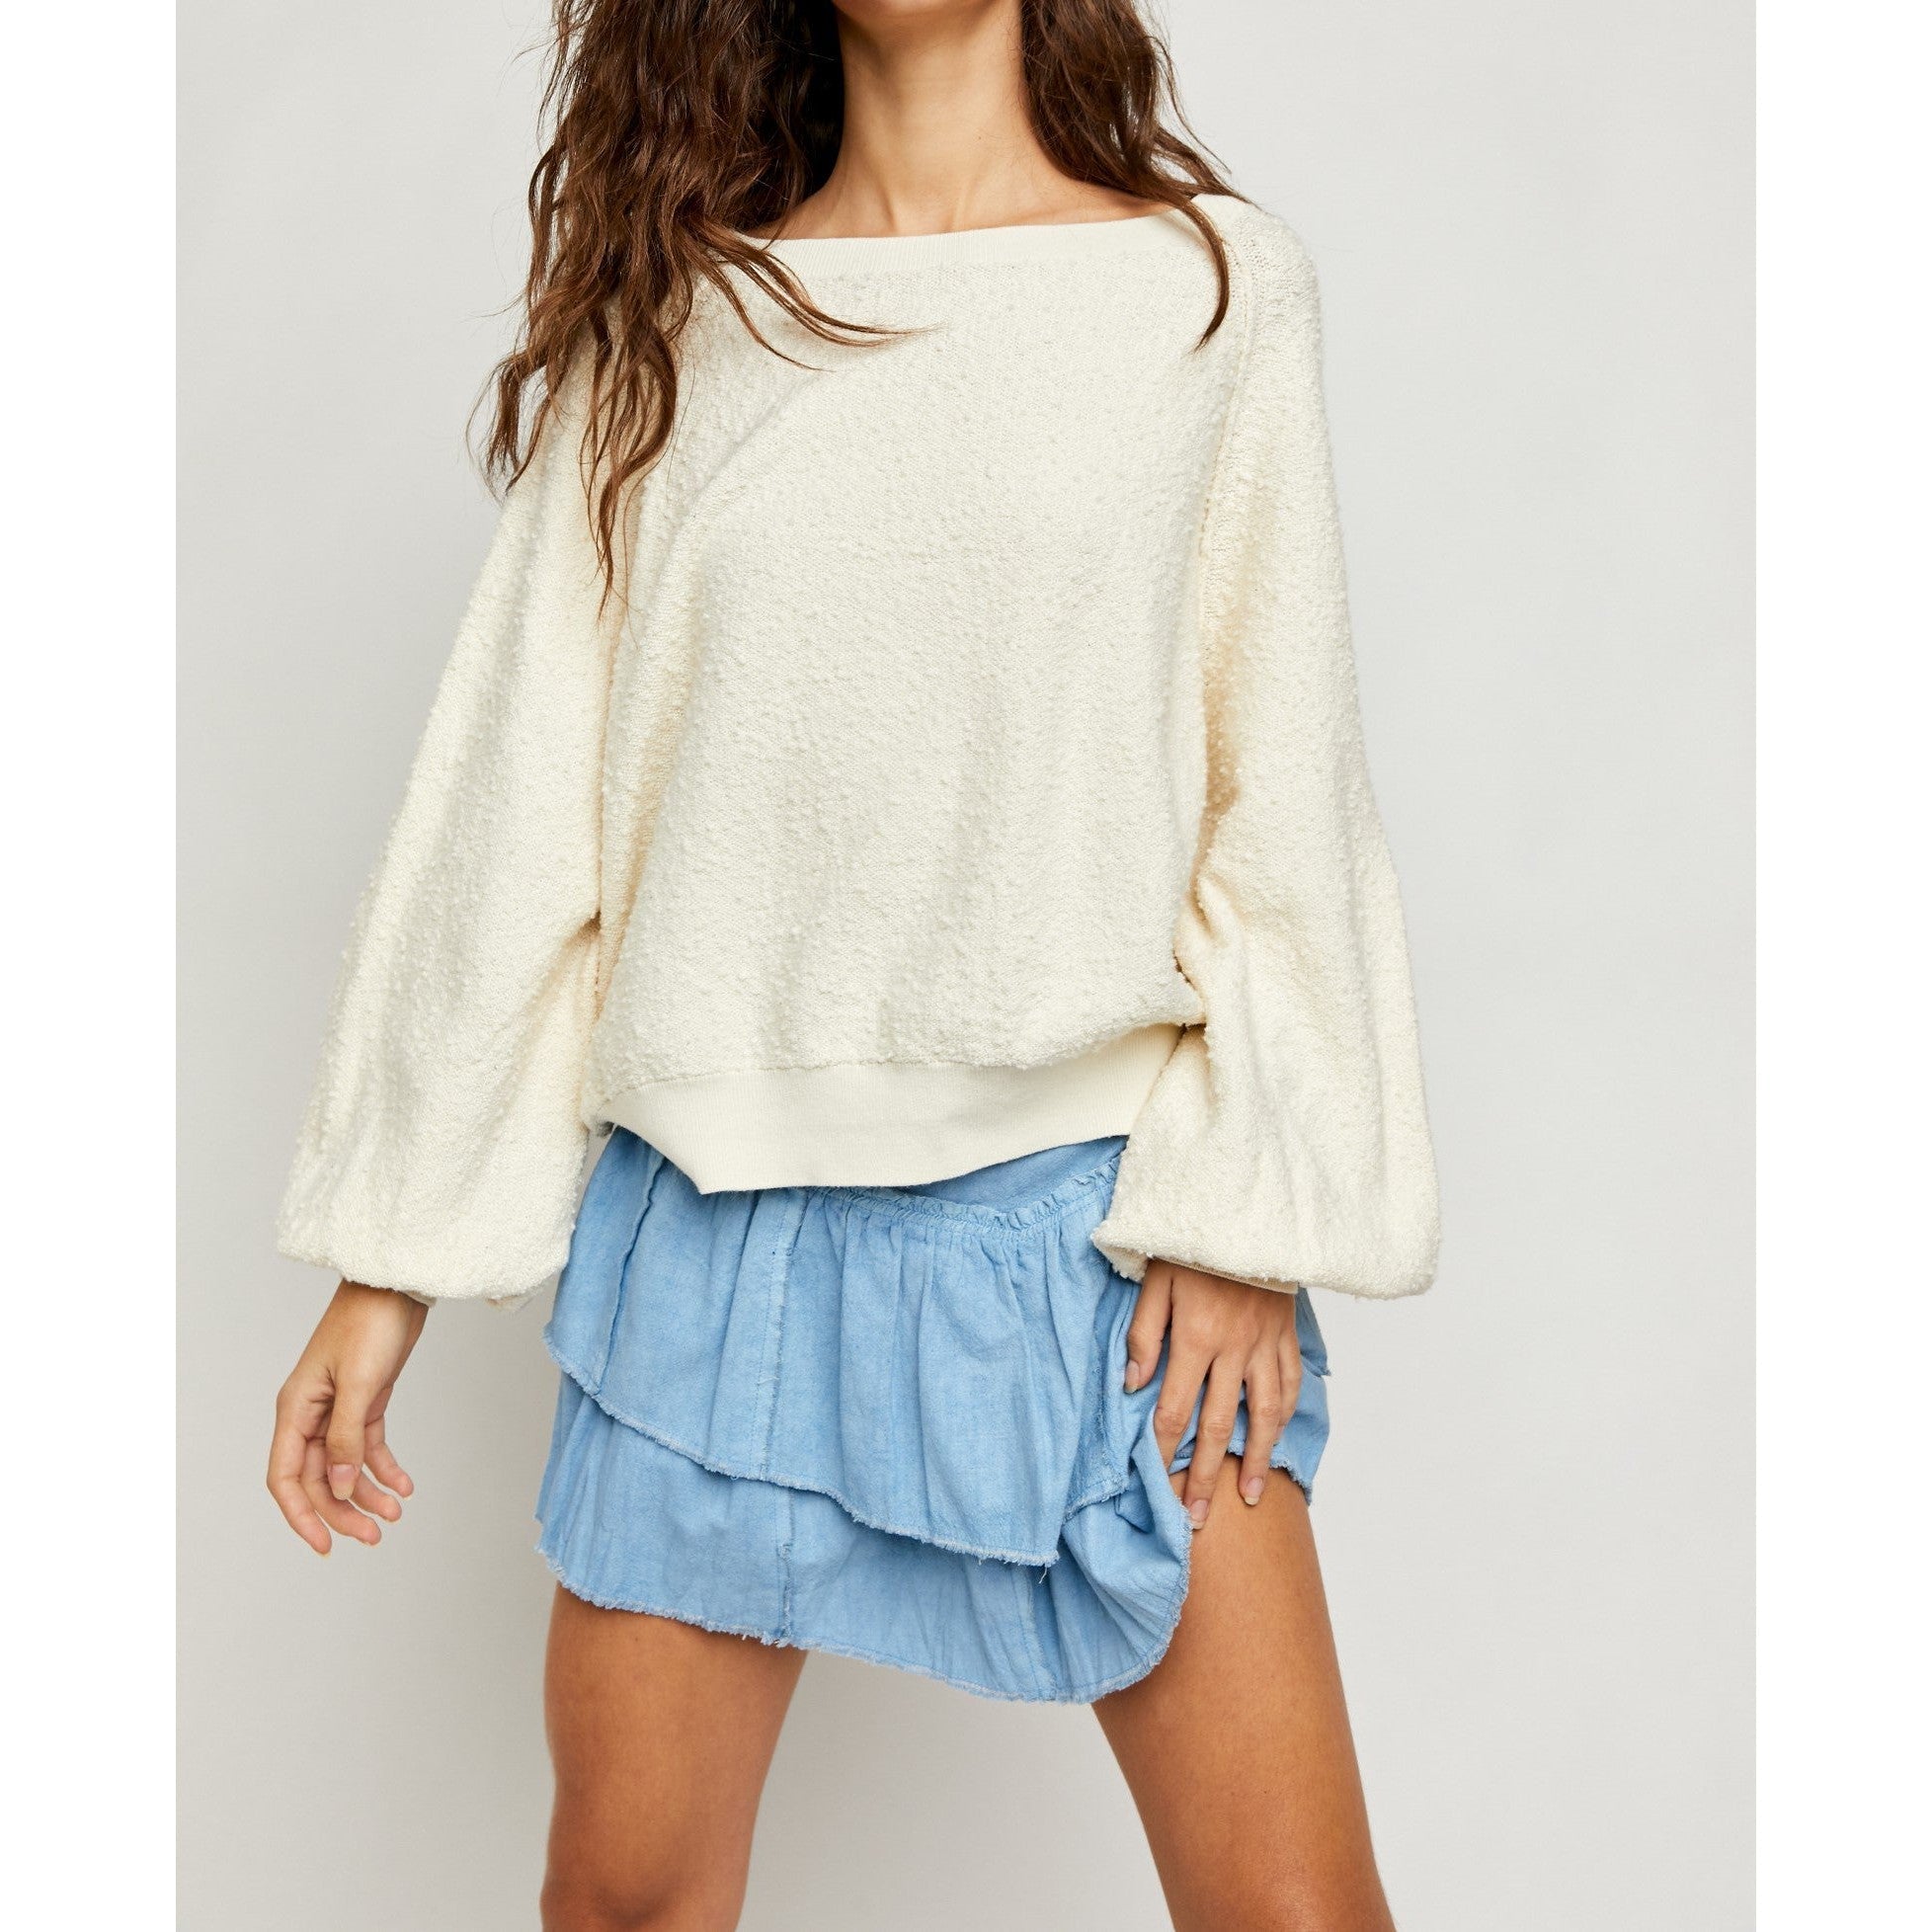 FOUND MY FRIEND PULLOVER-Shirts & Tops-FREE PEOPLE-XSMALL-CREAM-Coriander